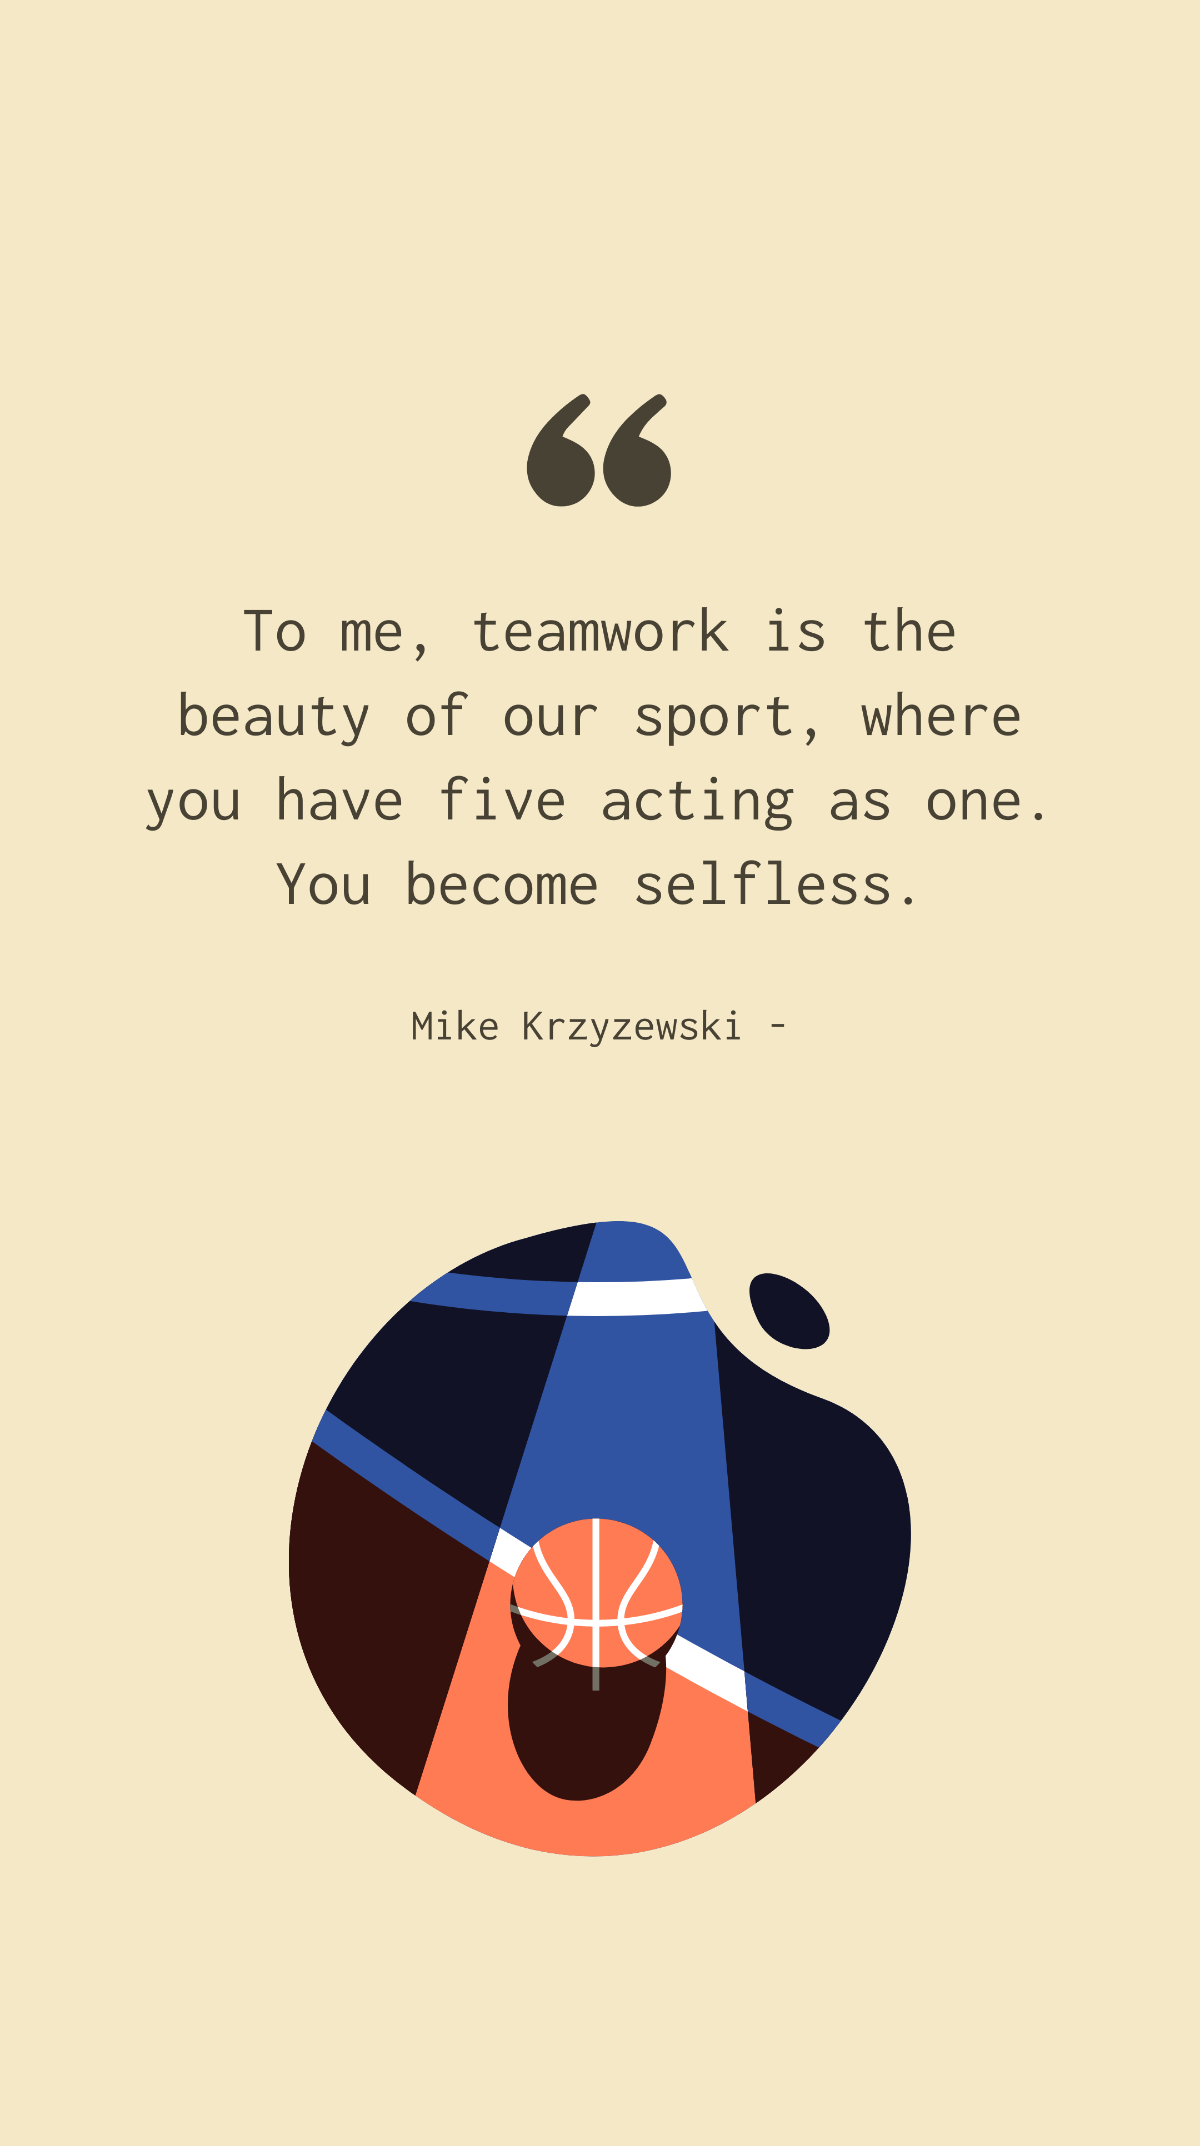 Mike Krzyzewski - To me, teamwork is the beauty of our sport, where you have five acting as one. You become selfless. Template